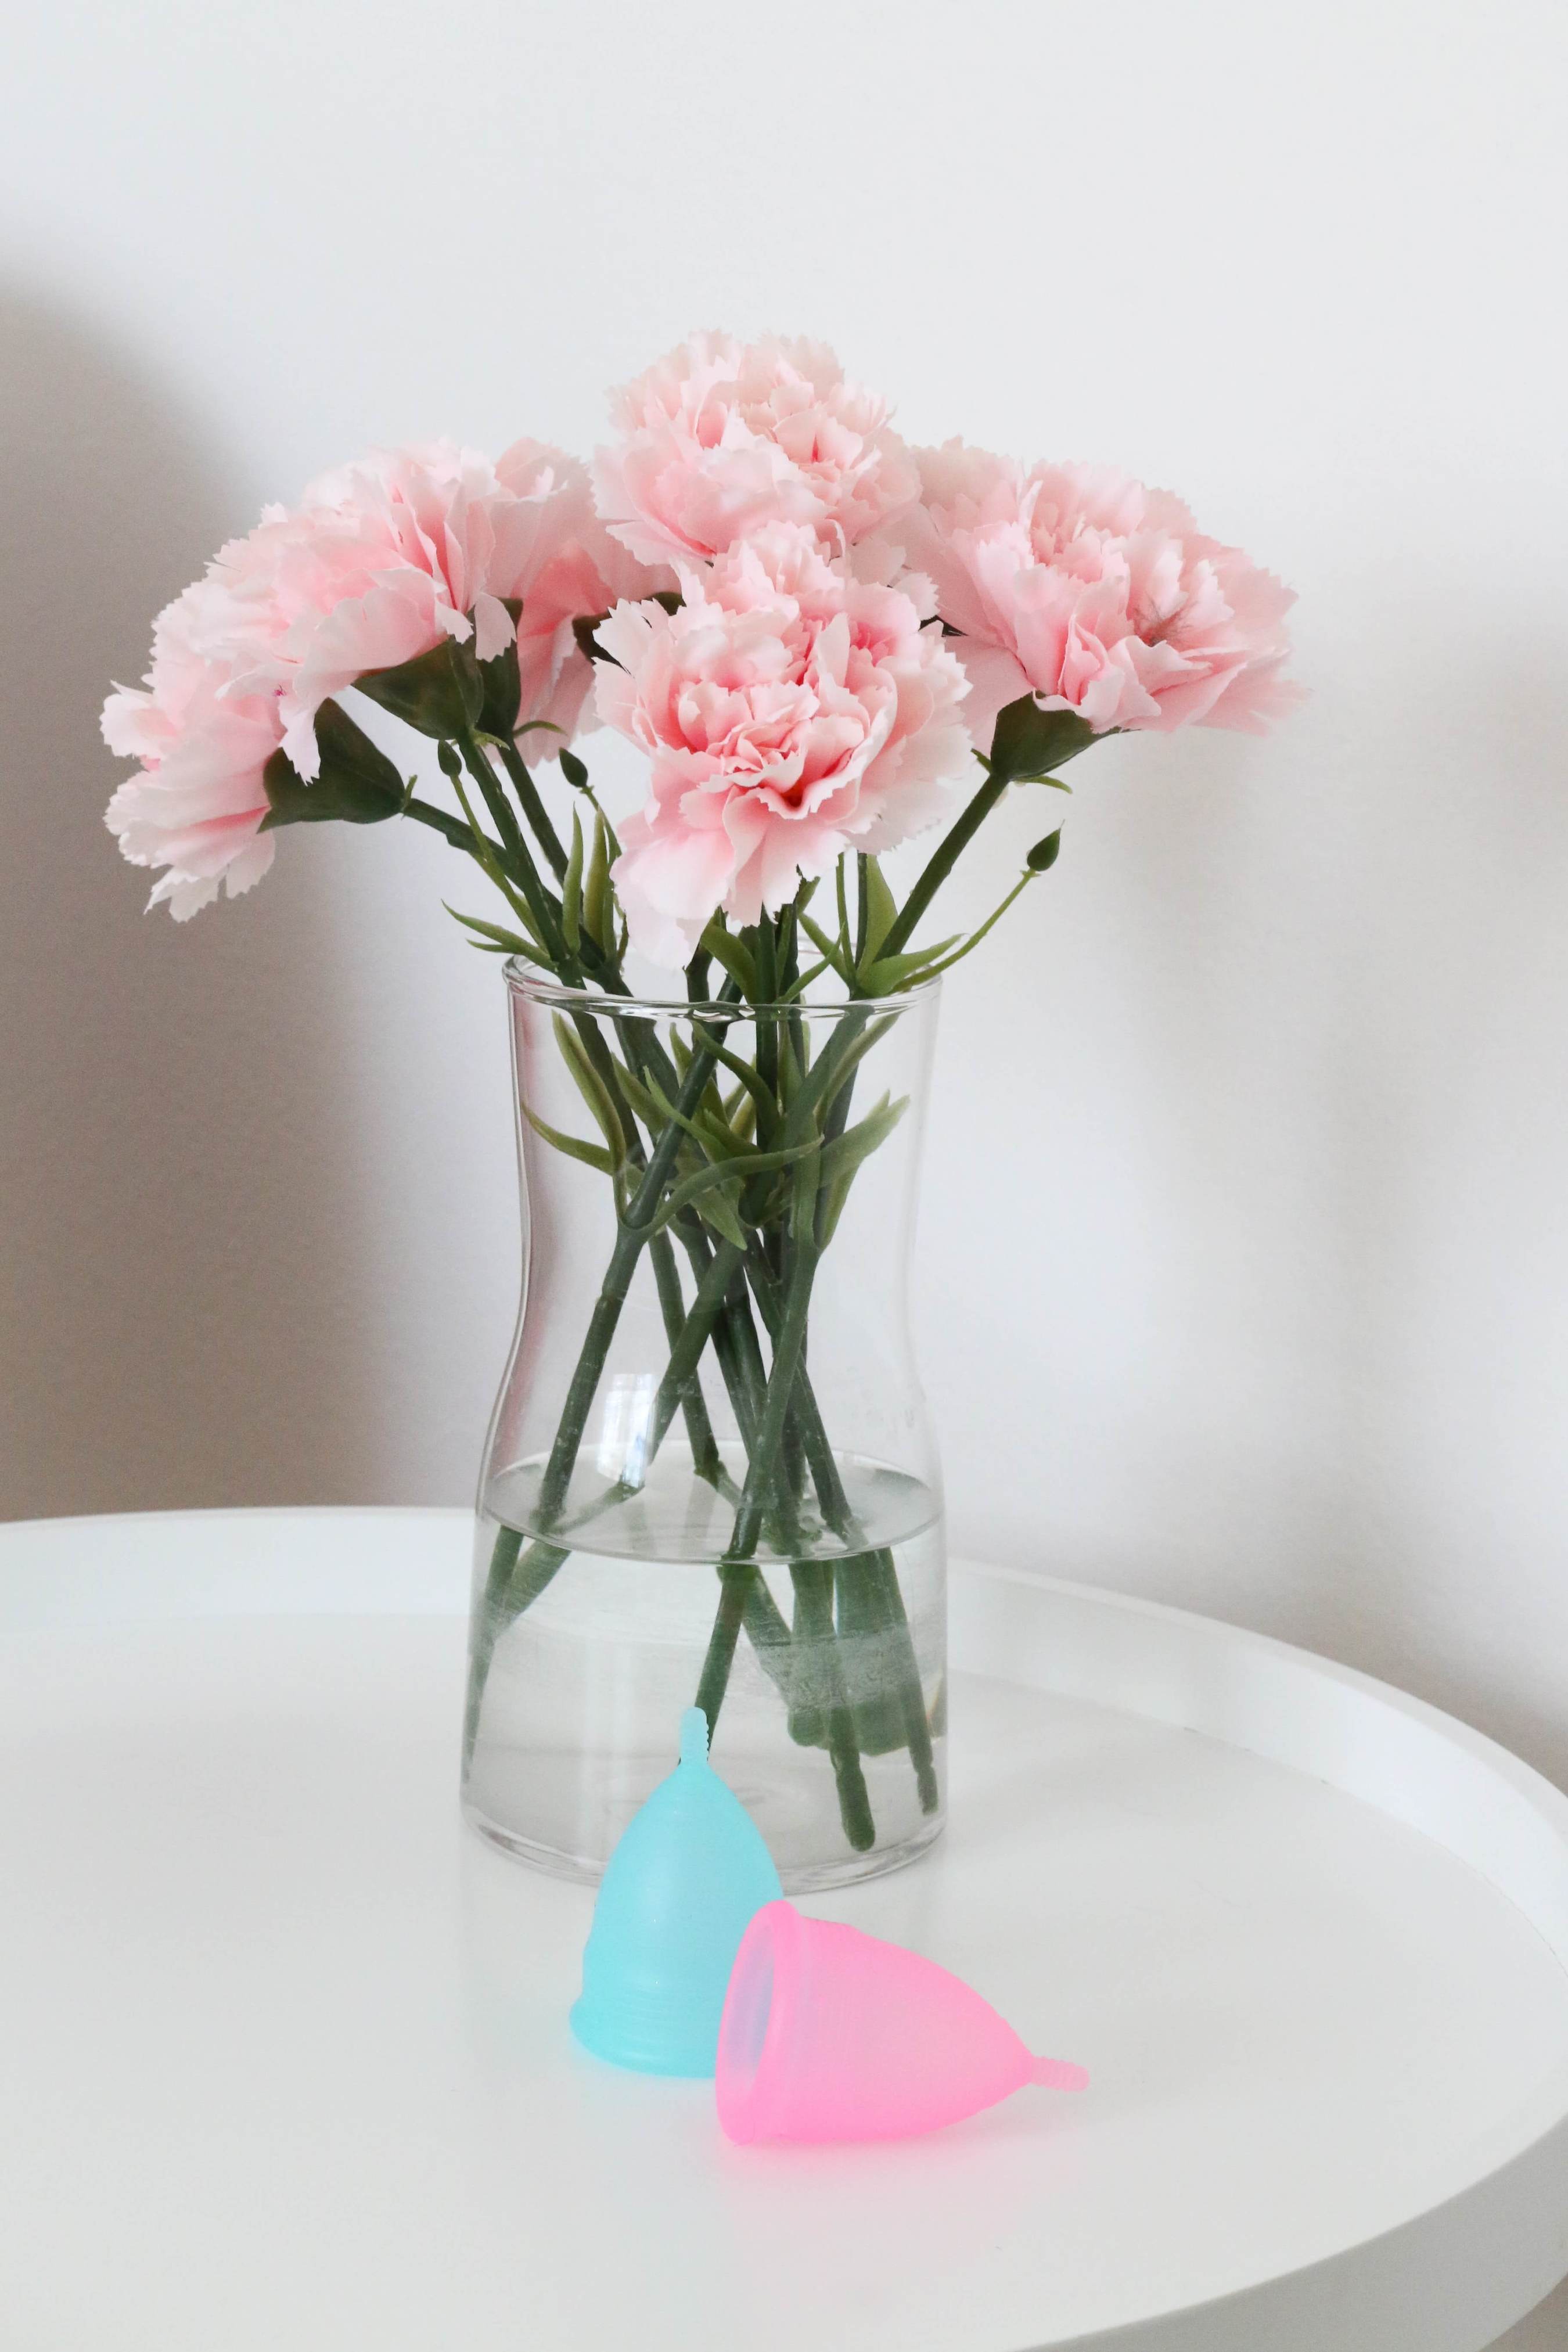 menstrual cups, on a table, against a floral background